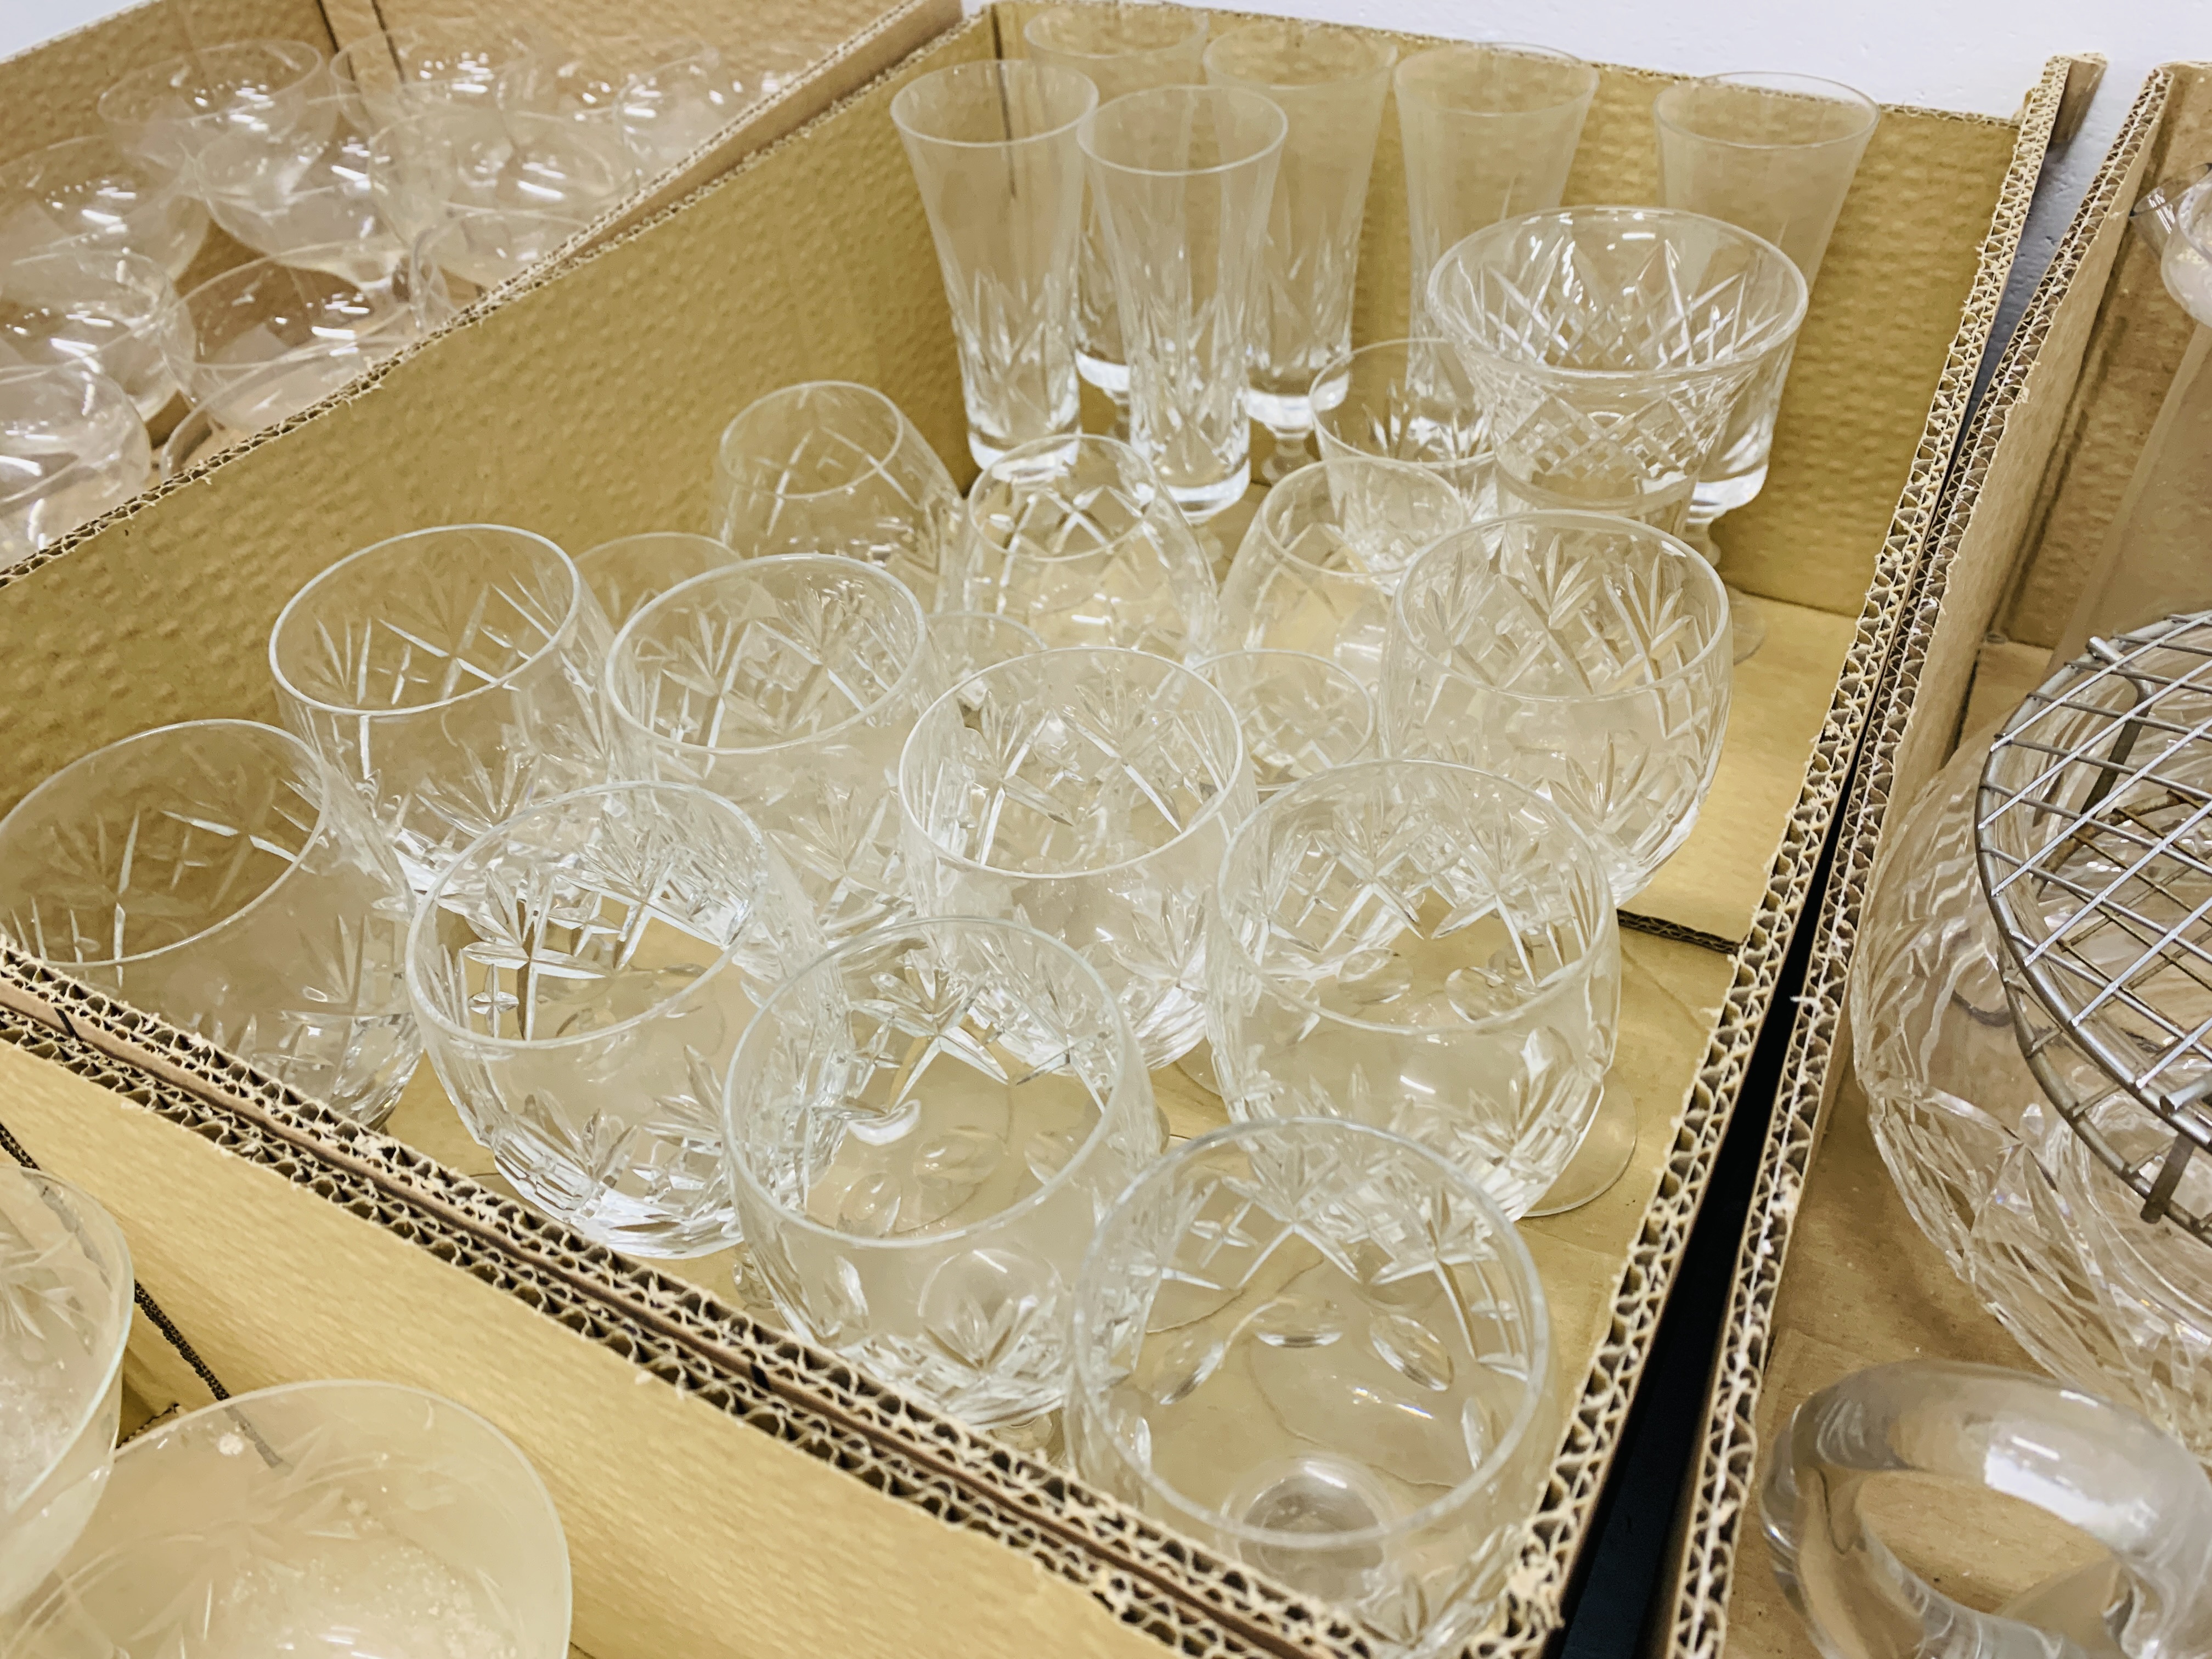 SIX BOXES CONTAINING ASSORTED GLASSWARE TO INCLUDE CRYSTAL GLASSWARE, DECANTERS, VASES, ROSE BOWLS, - Image 6 of 7